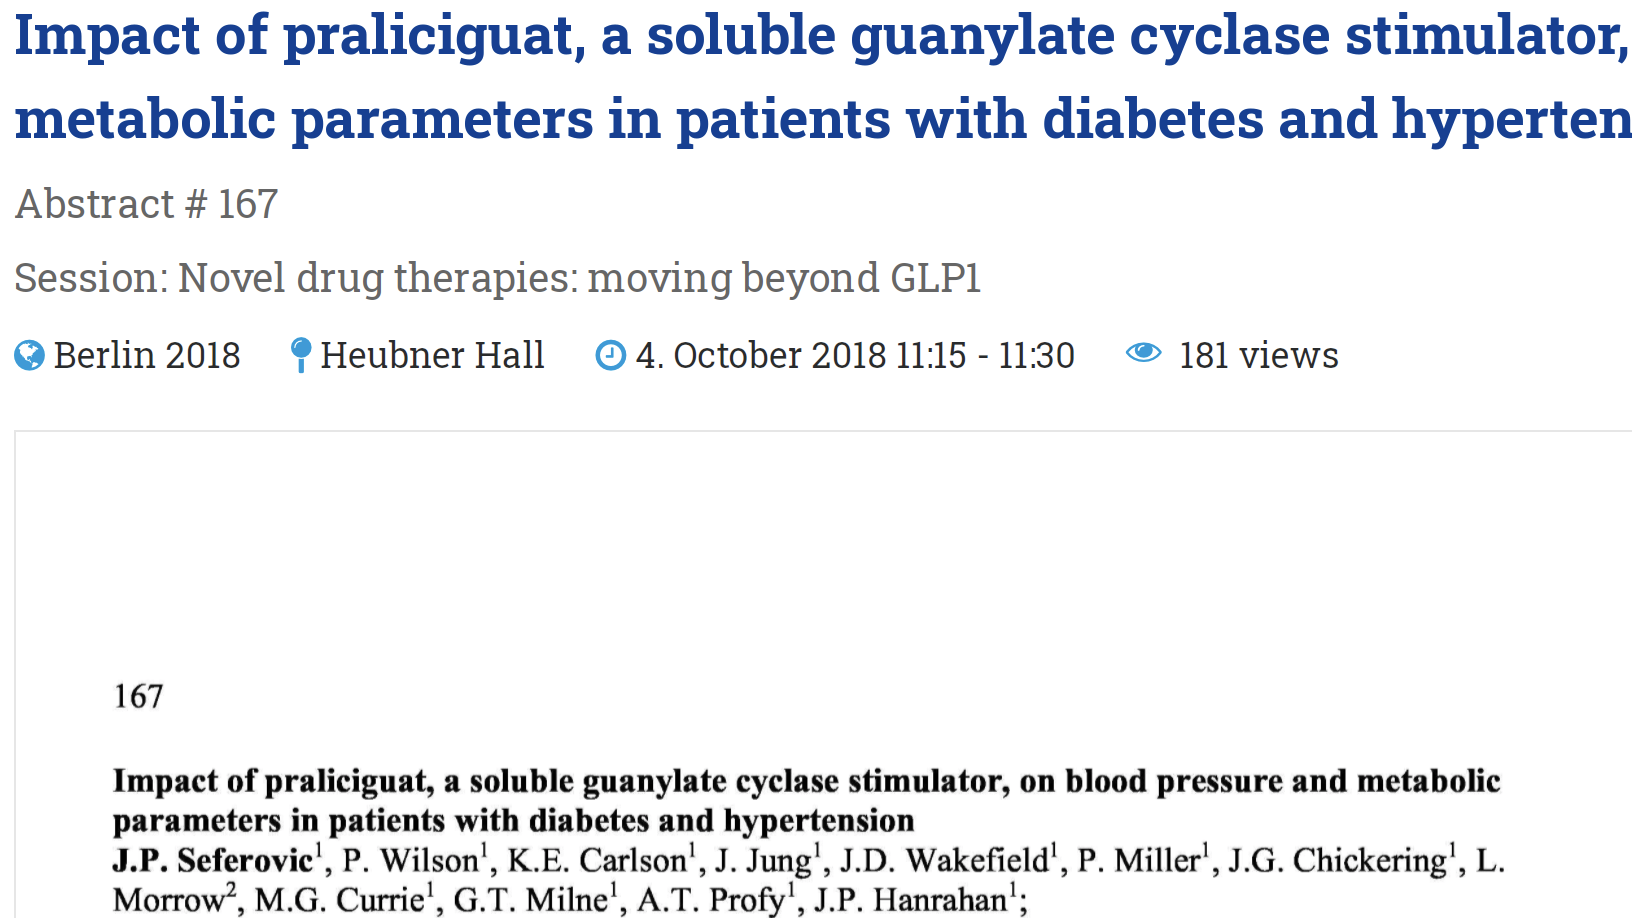 image of Impact of praliciguat, a soluble guanylate cyclase stimulator, on blood pressure and metabolic parameters in patients with diabetes and hypertension